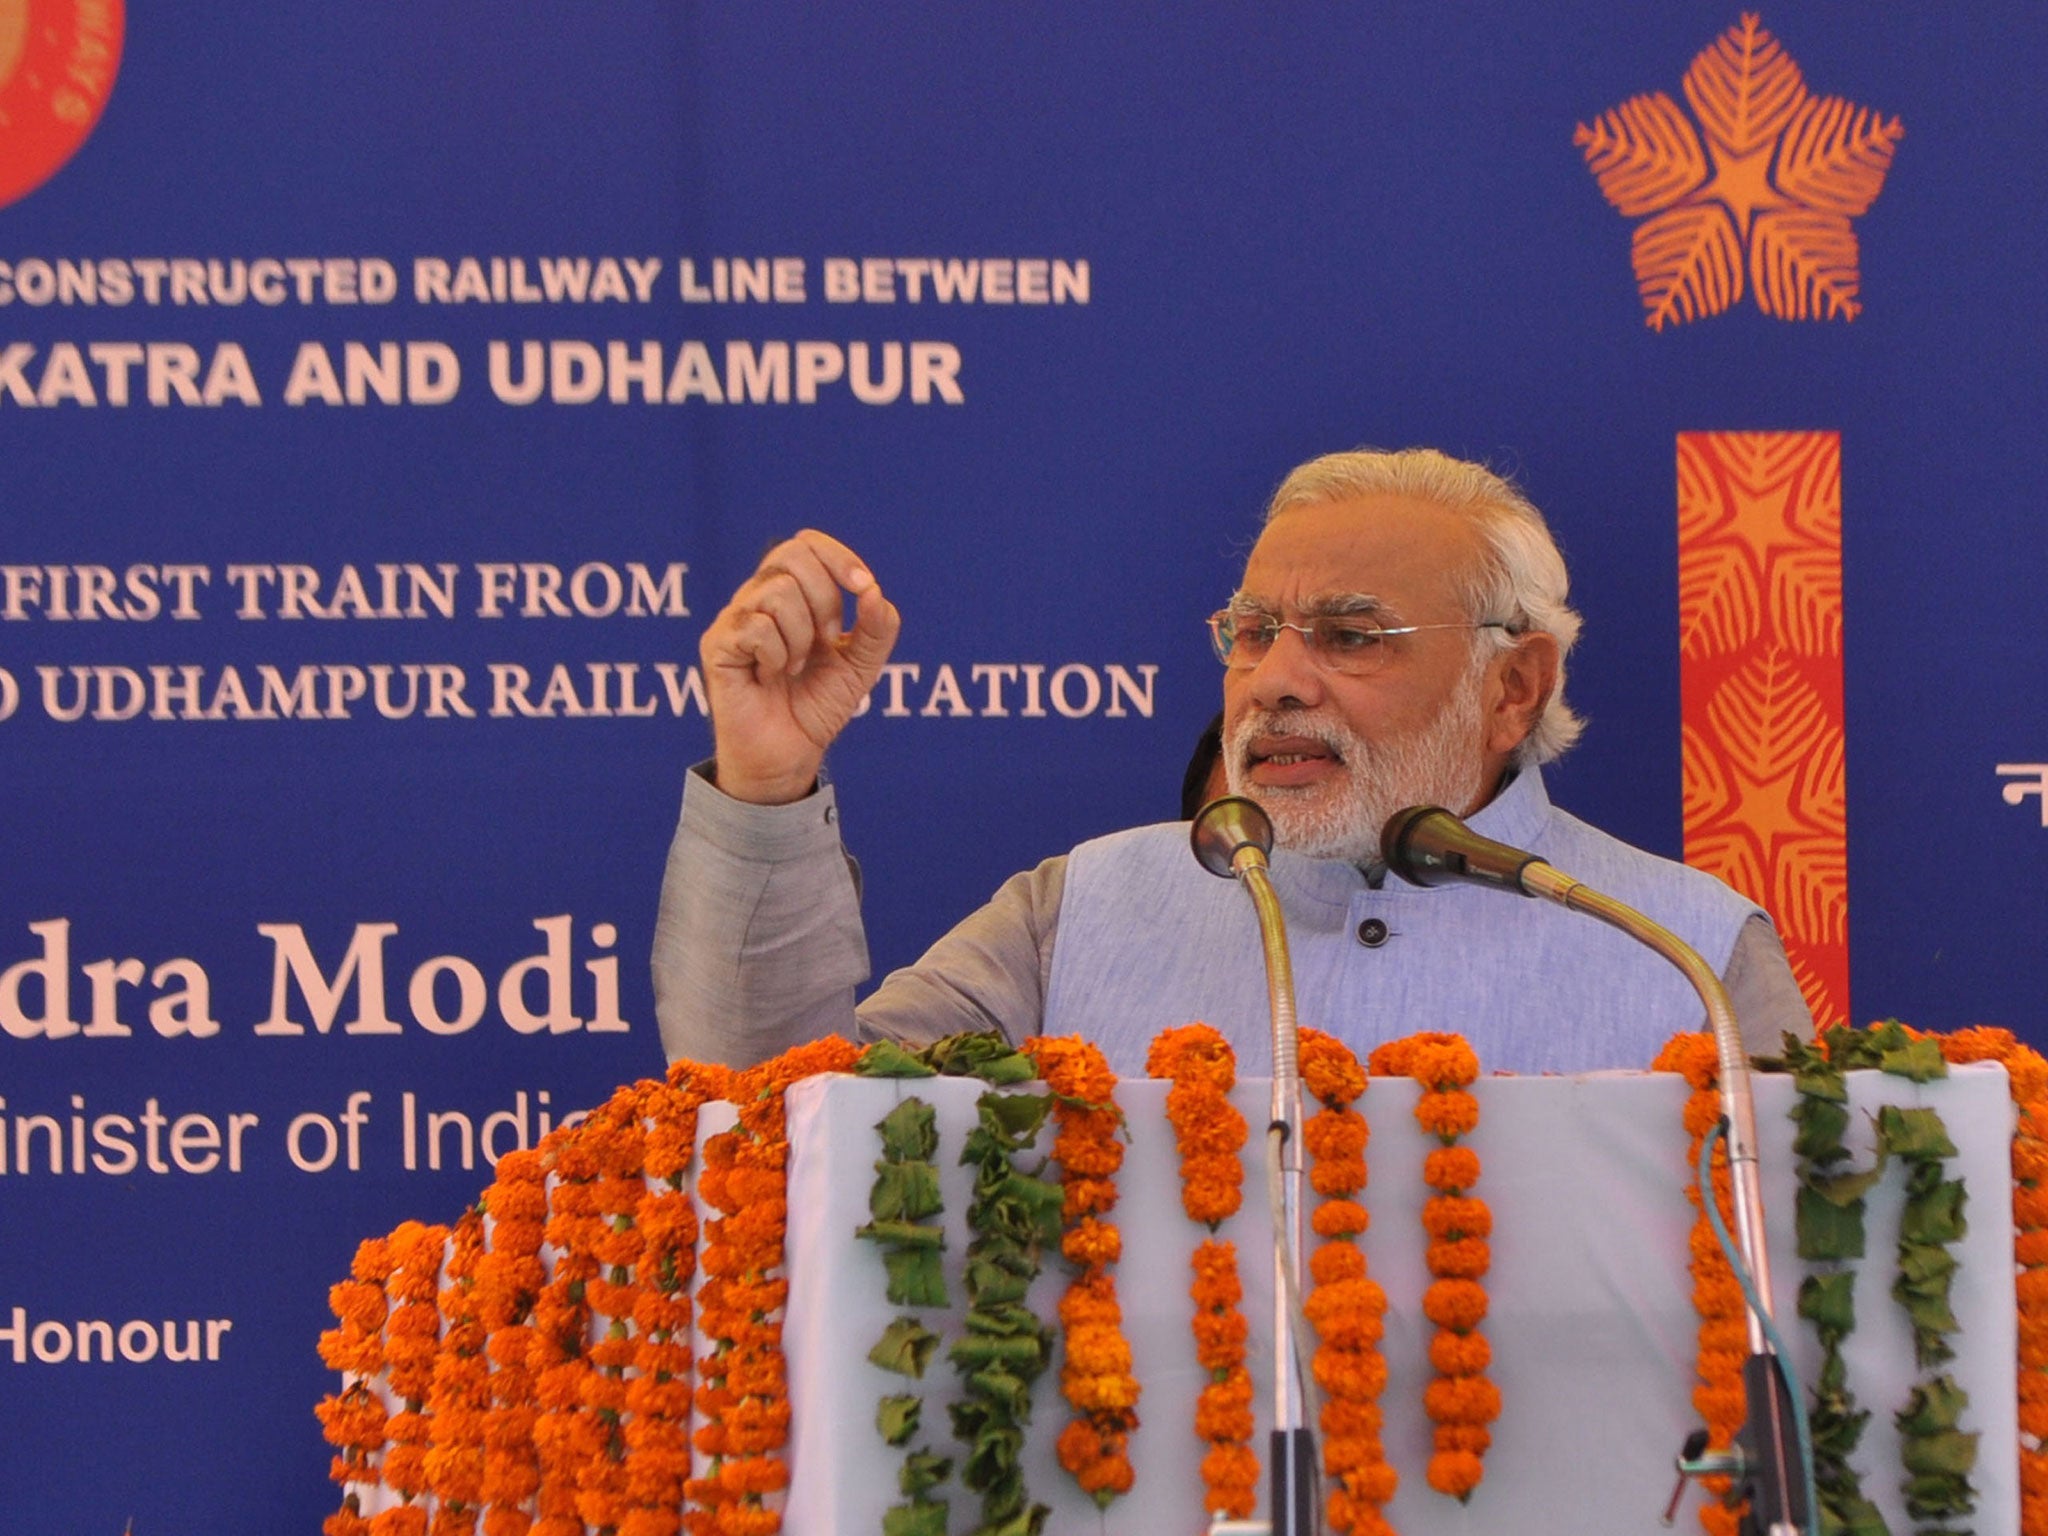 Indian Prime Minister Narendra Modi speaks during the inauguration ceremony at Katra railway station in Katra